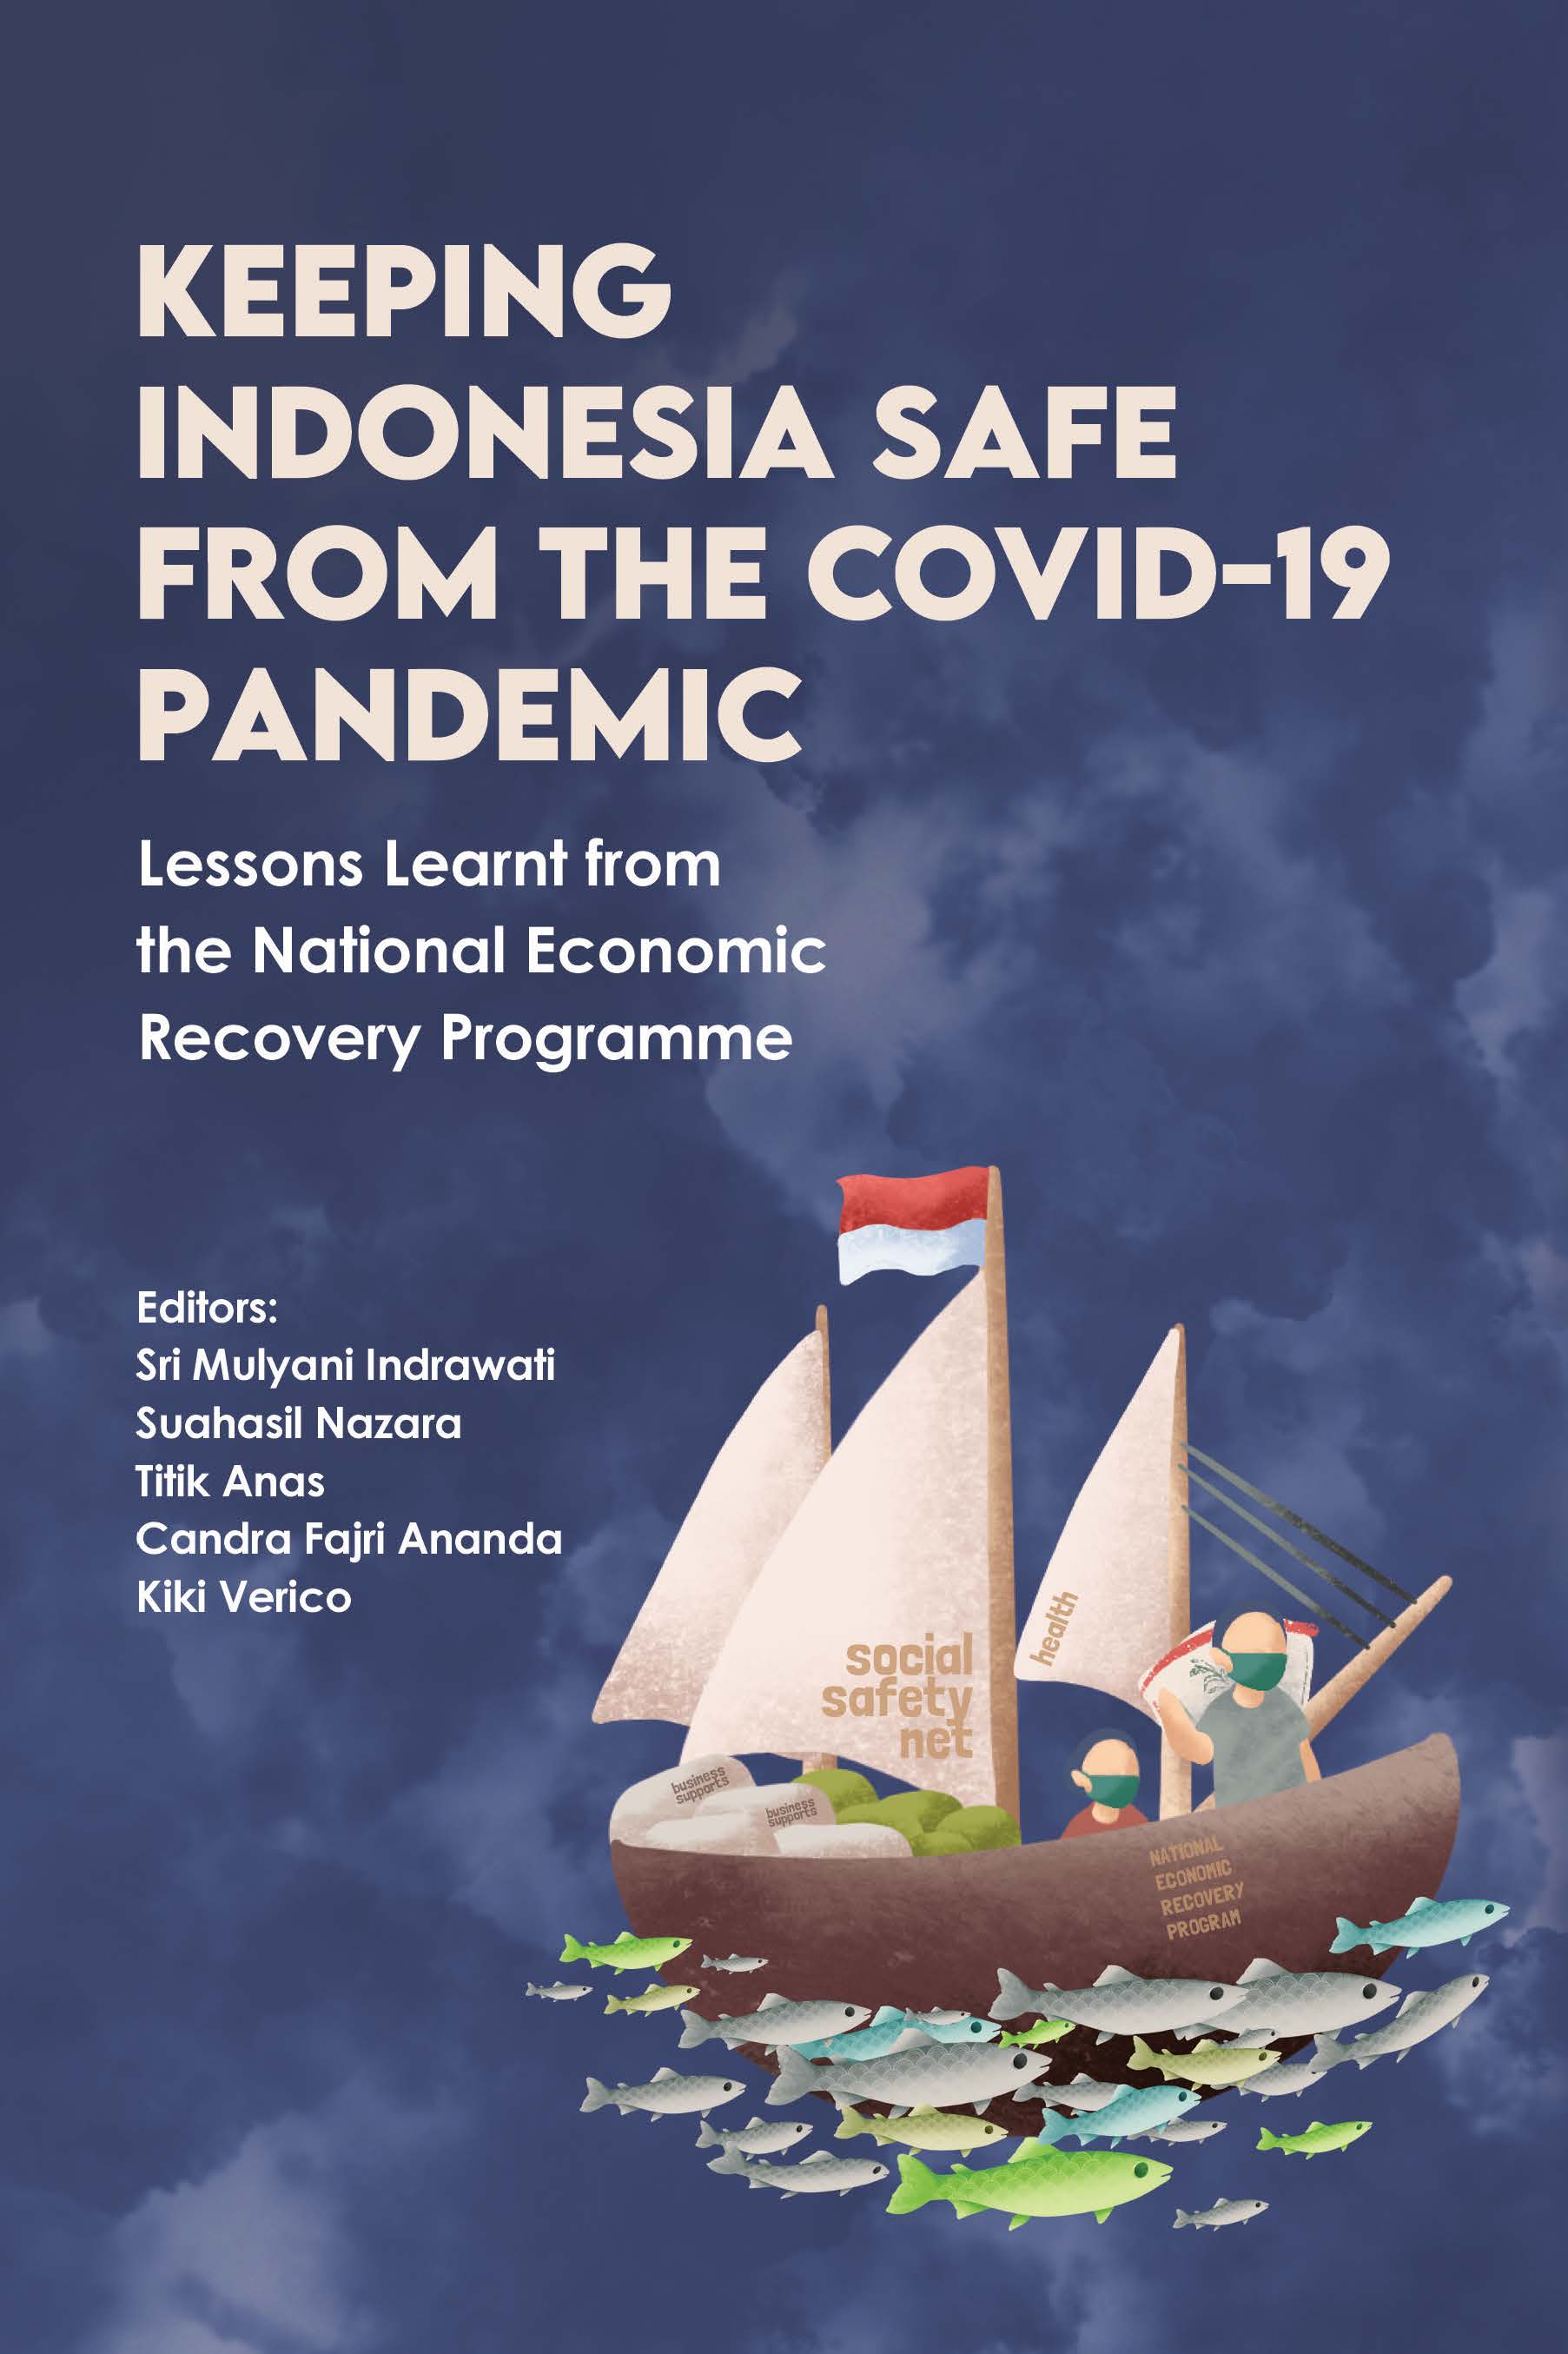 KEEPING INDONESIA SAFE FROM THE COVID-19 PANDEMIC: Lessons Learnt from the National Economic Recovery Programme